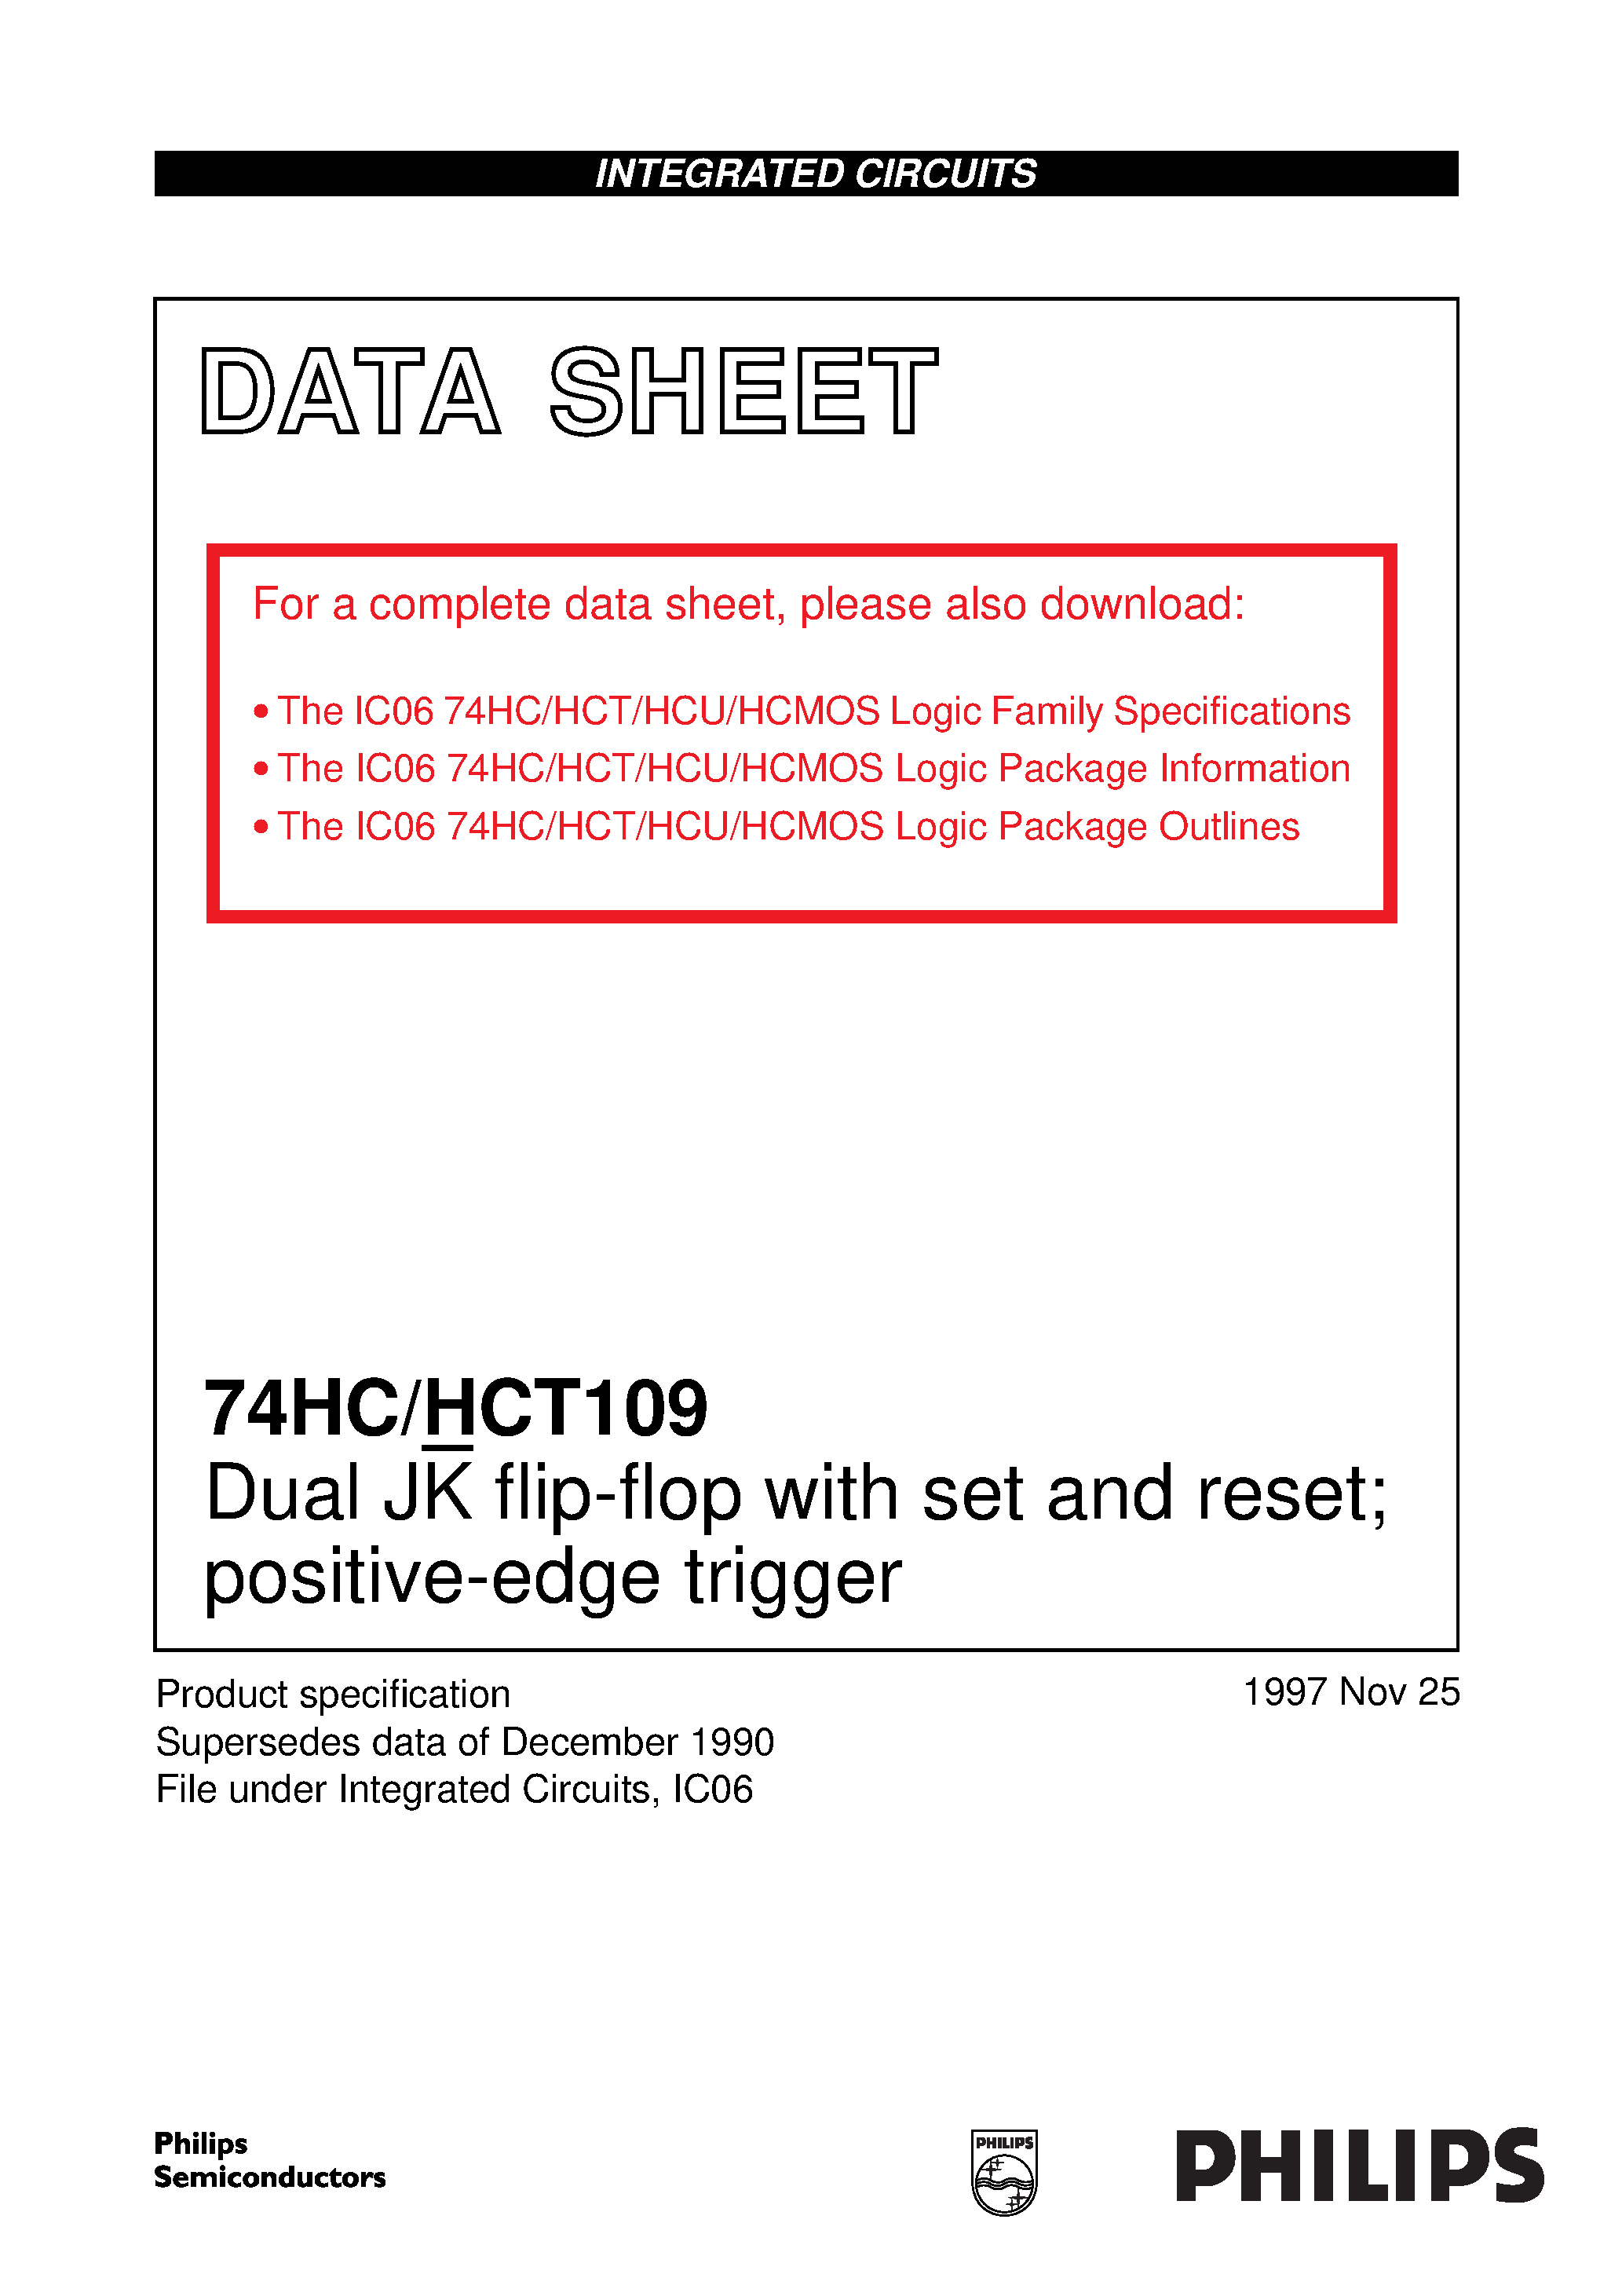 Datasheet 74HCT109 - Dual JK flip-flop with set and reset positive-edge trigger page 1